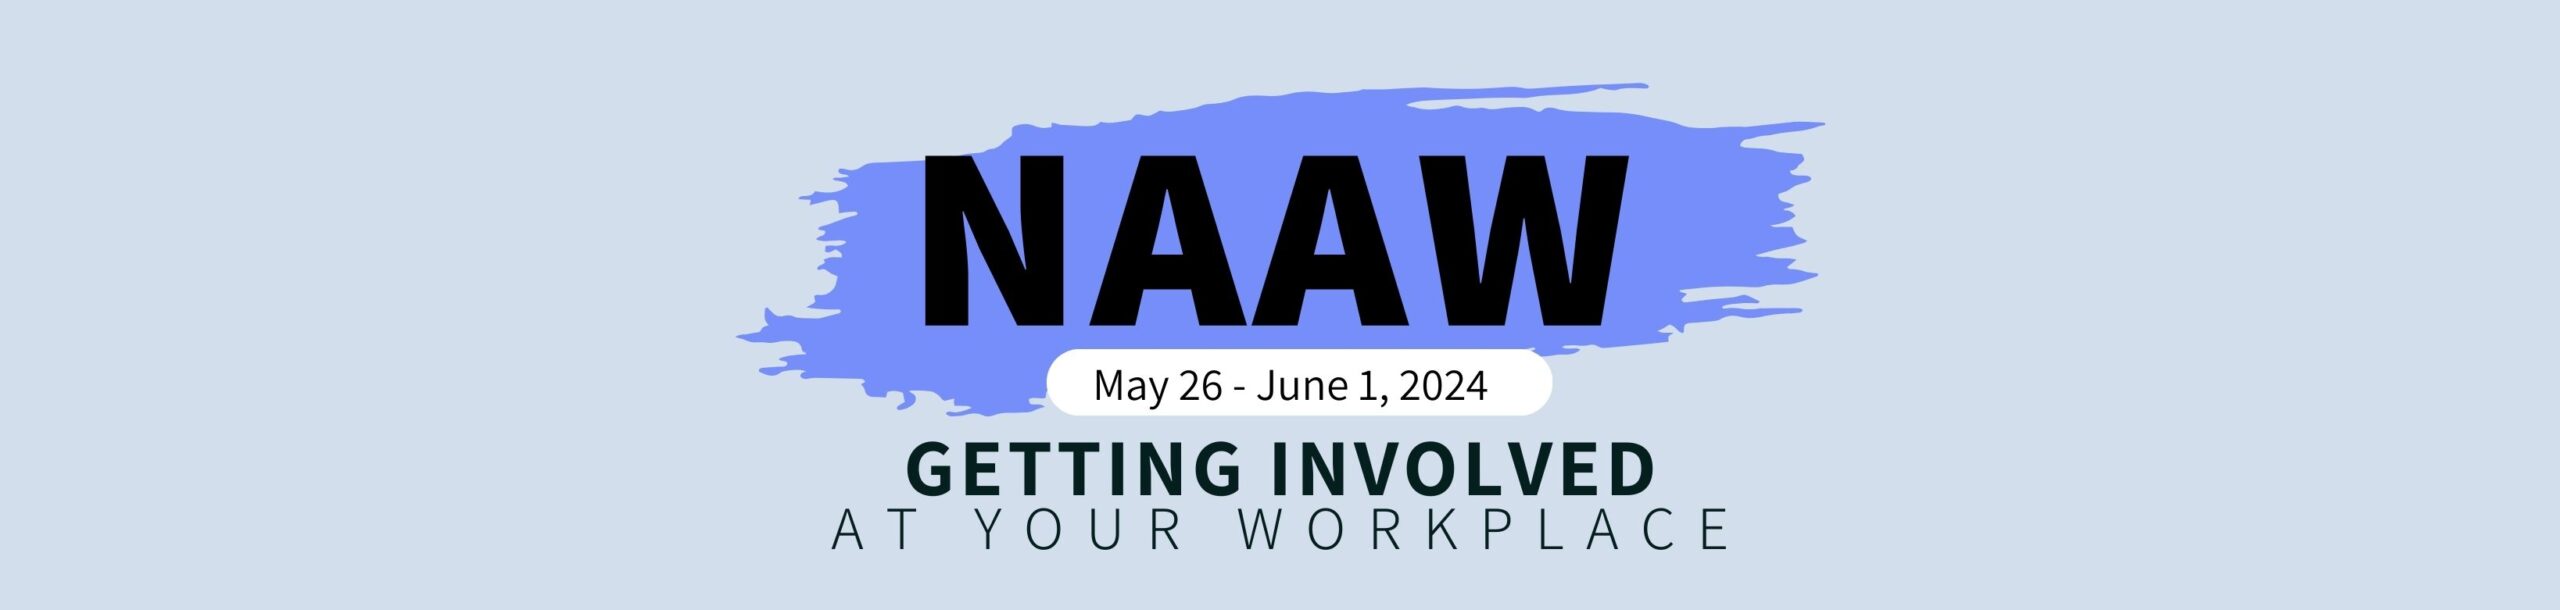 NAAW – Getting Involved at Your Workplace